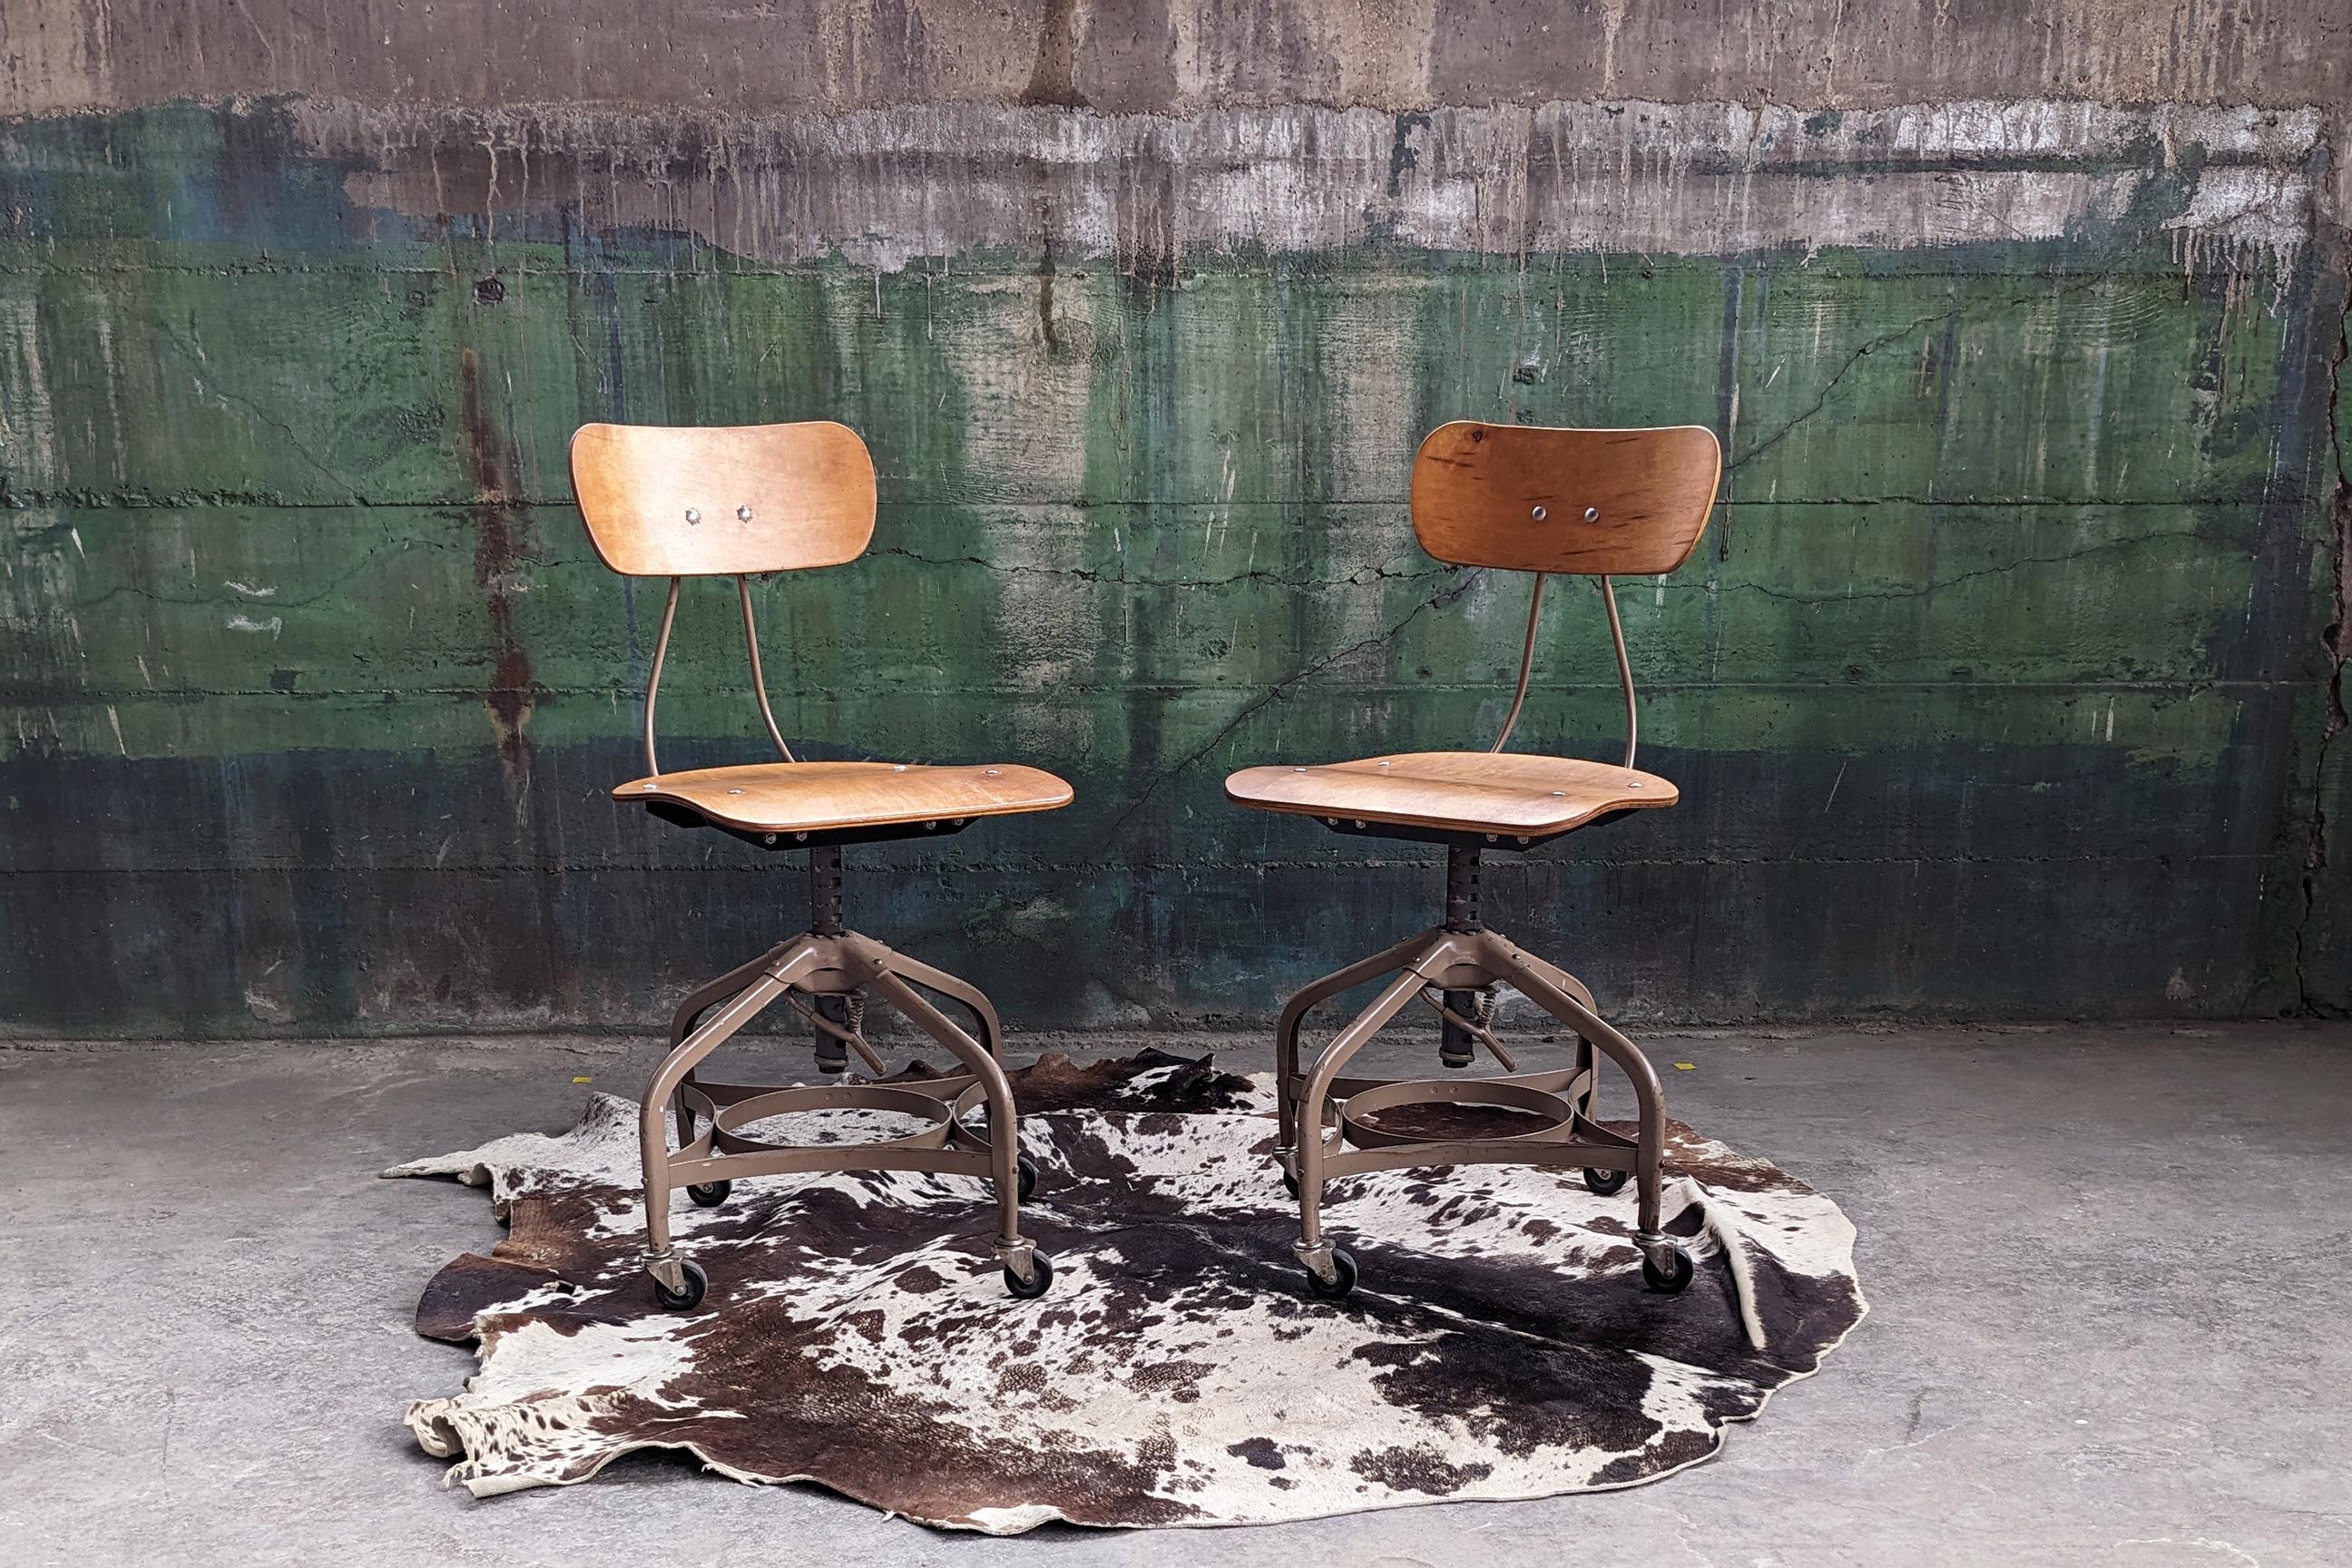 A PAIR of 2 Toledo Metal Furniture Co. chairs from the mid 20th century that can be adjusted for use in drafting, office, or university settings.

These chairs have a bentwood seat and seat back with a beige metal base and are equipped with casters